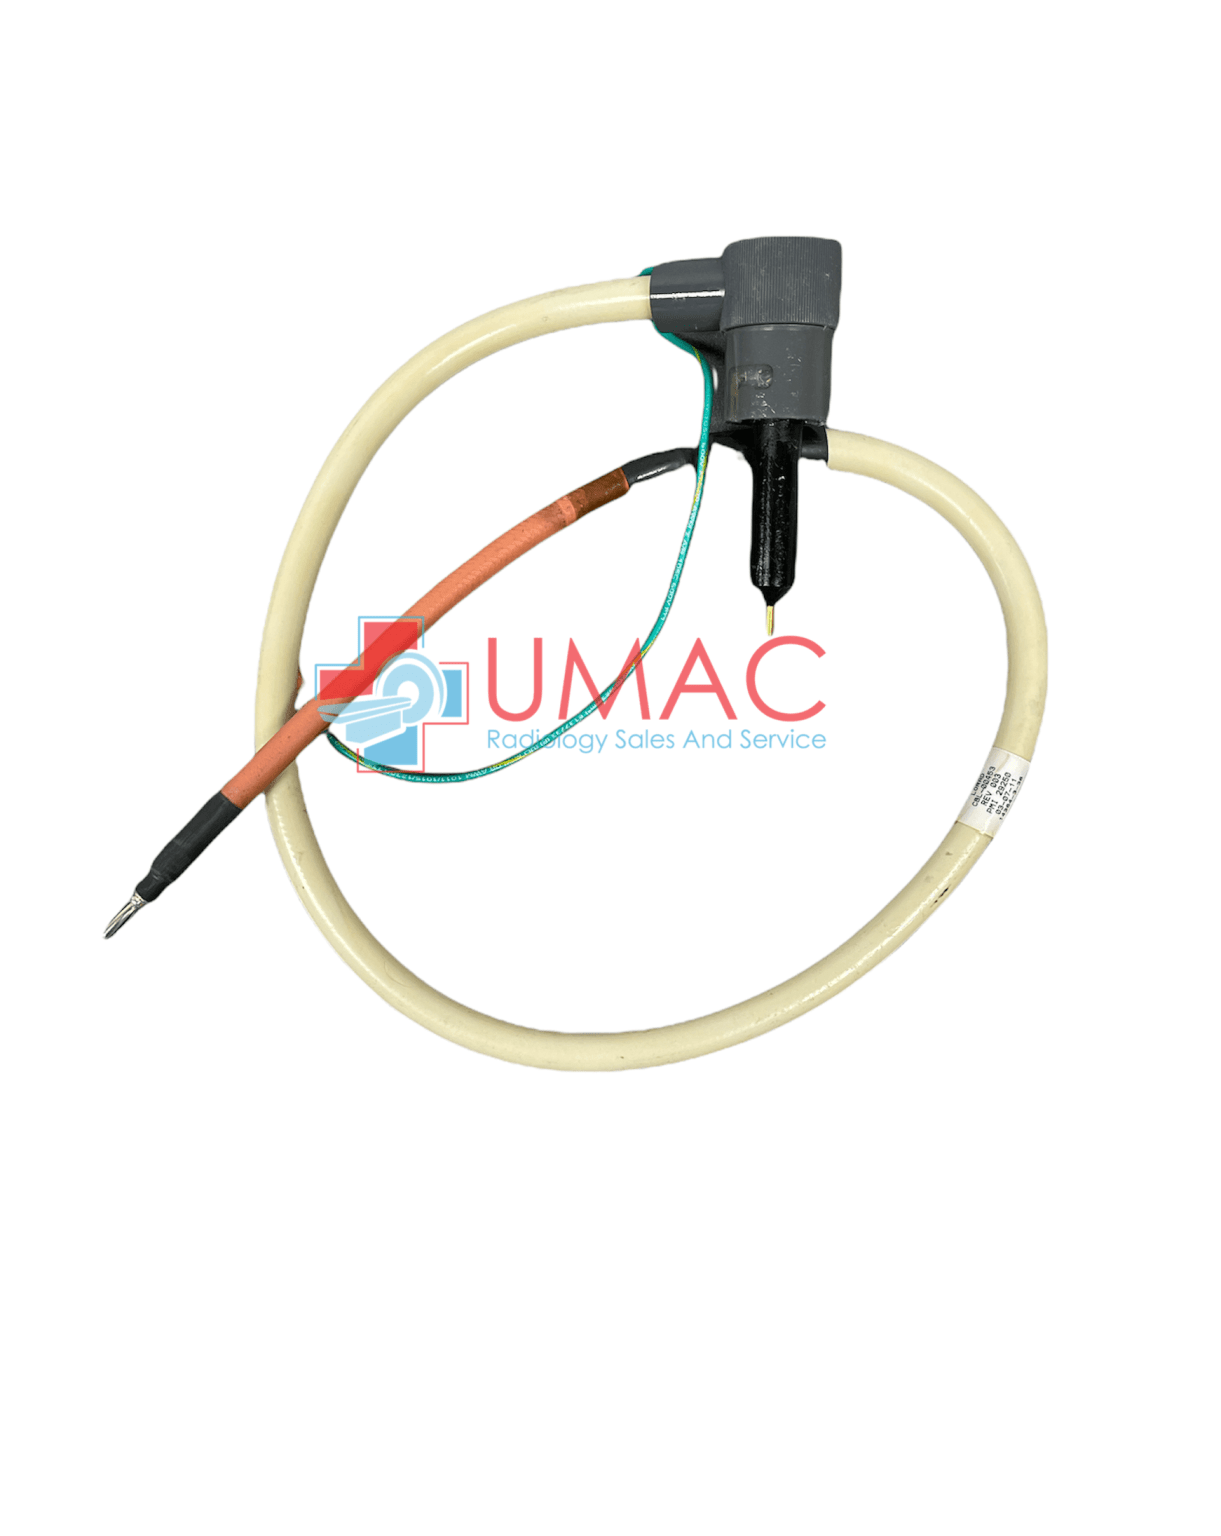 Hologic Dimensions Mammography CBL-00453 Cable